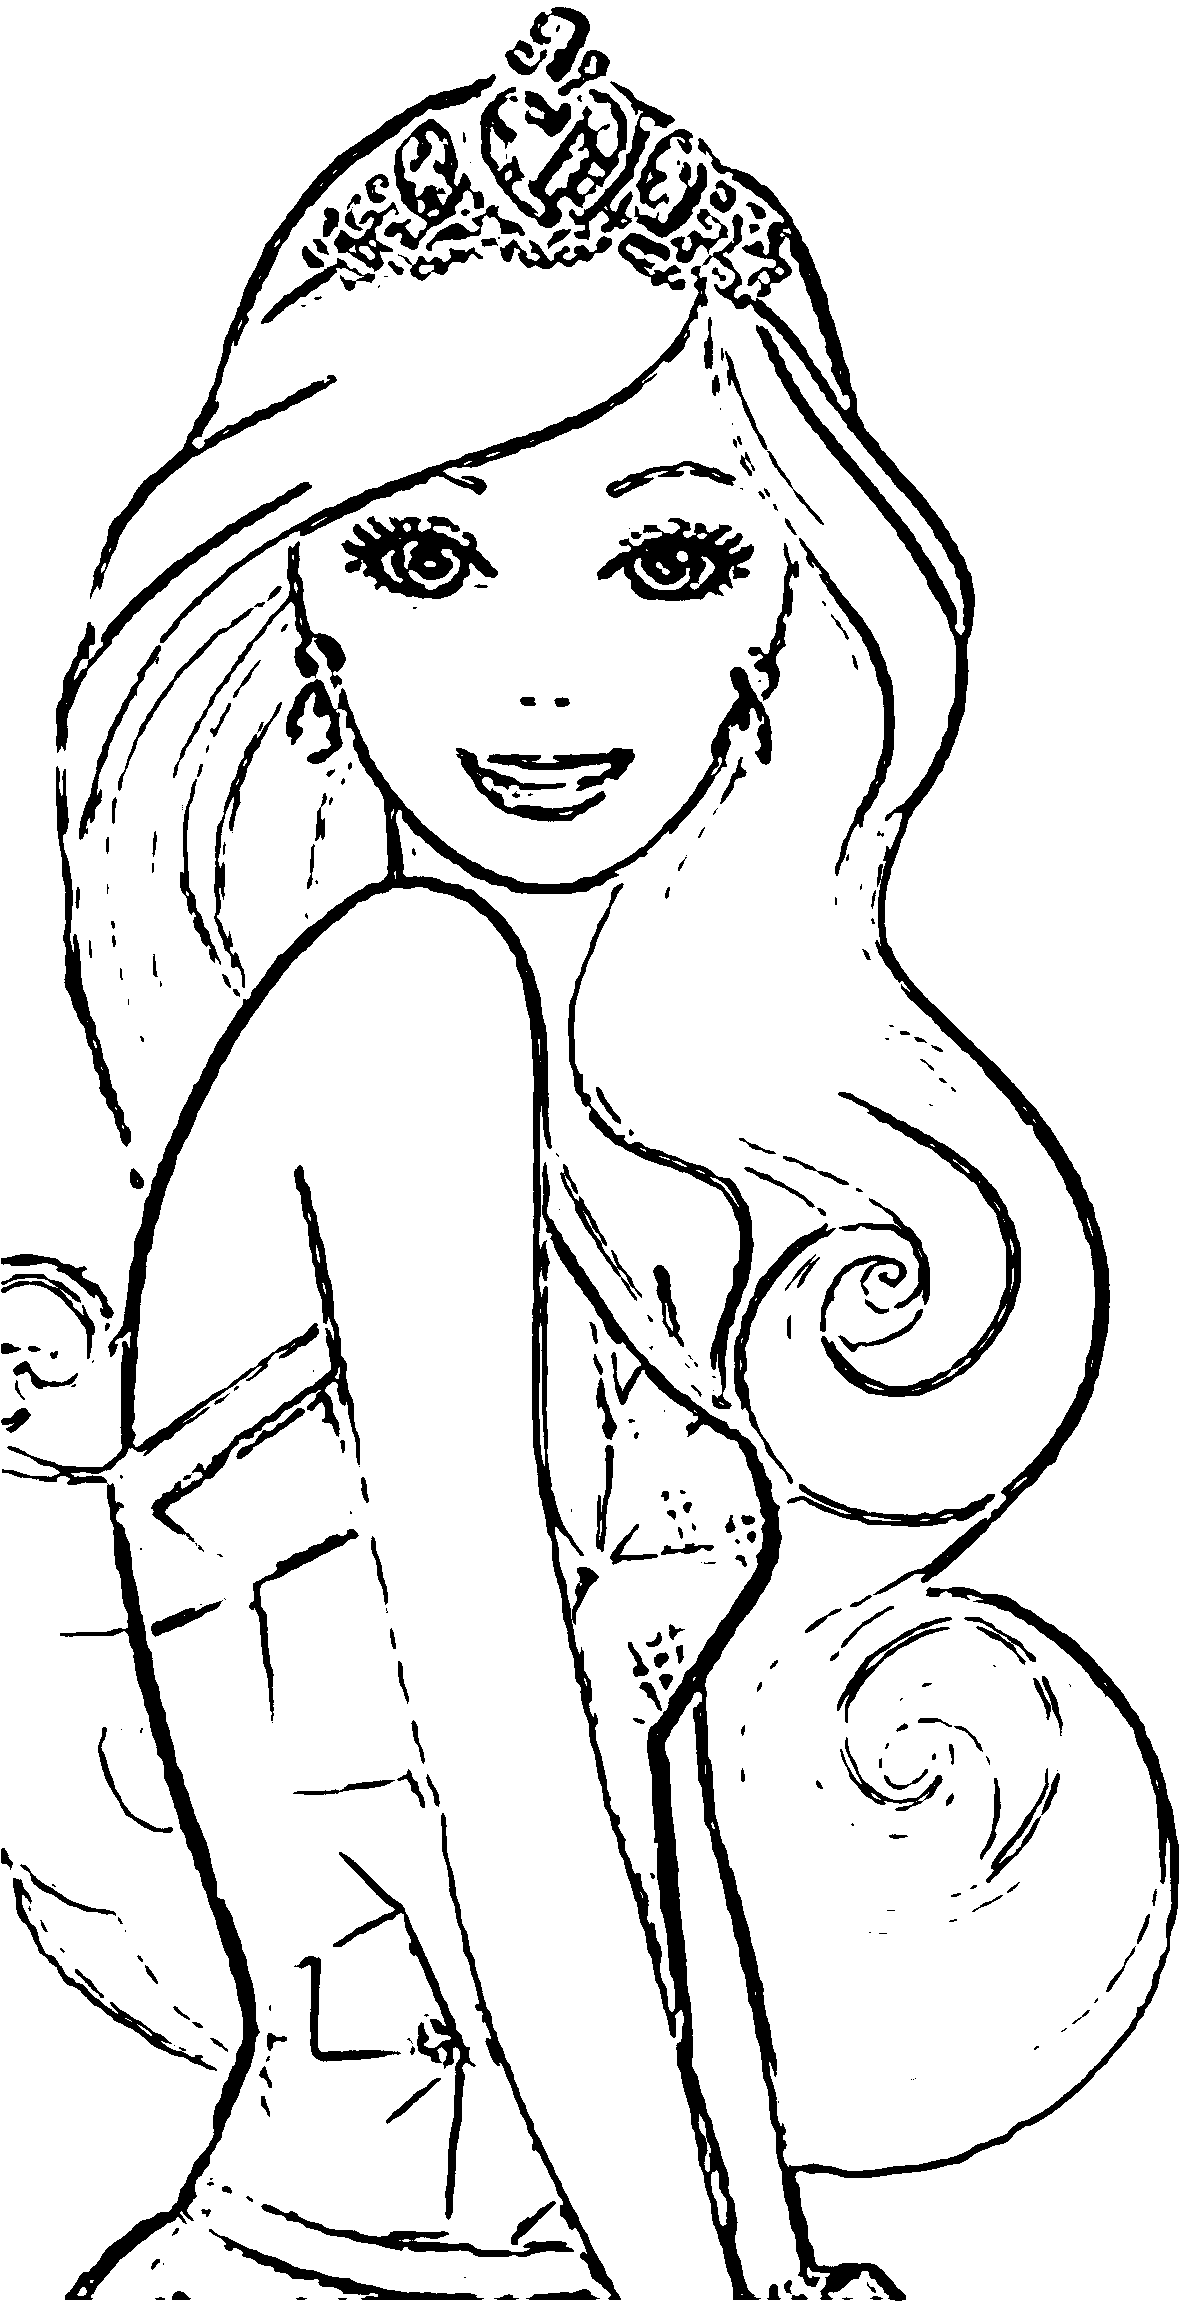 Barbie Face Coloring Page   Wecoloringpage   Coloring Home